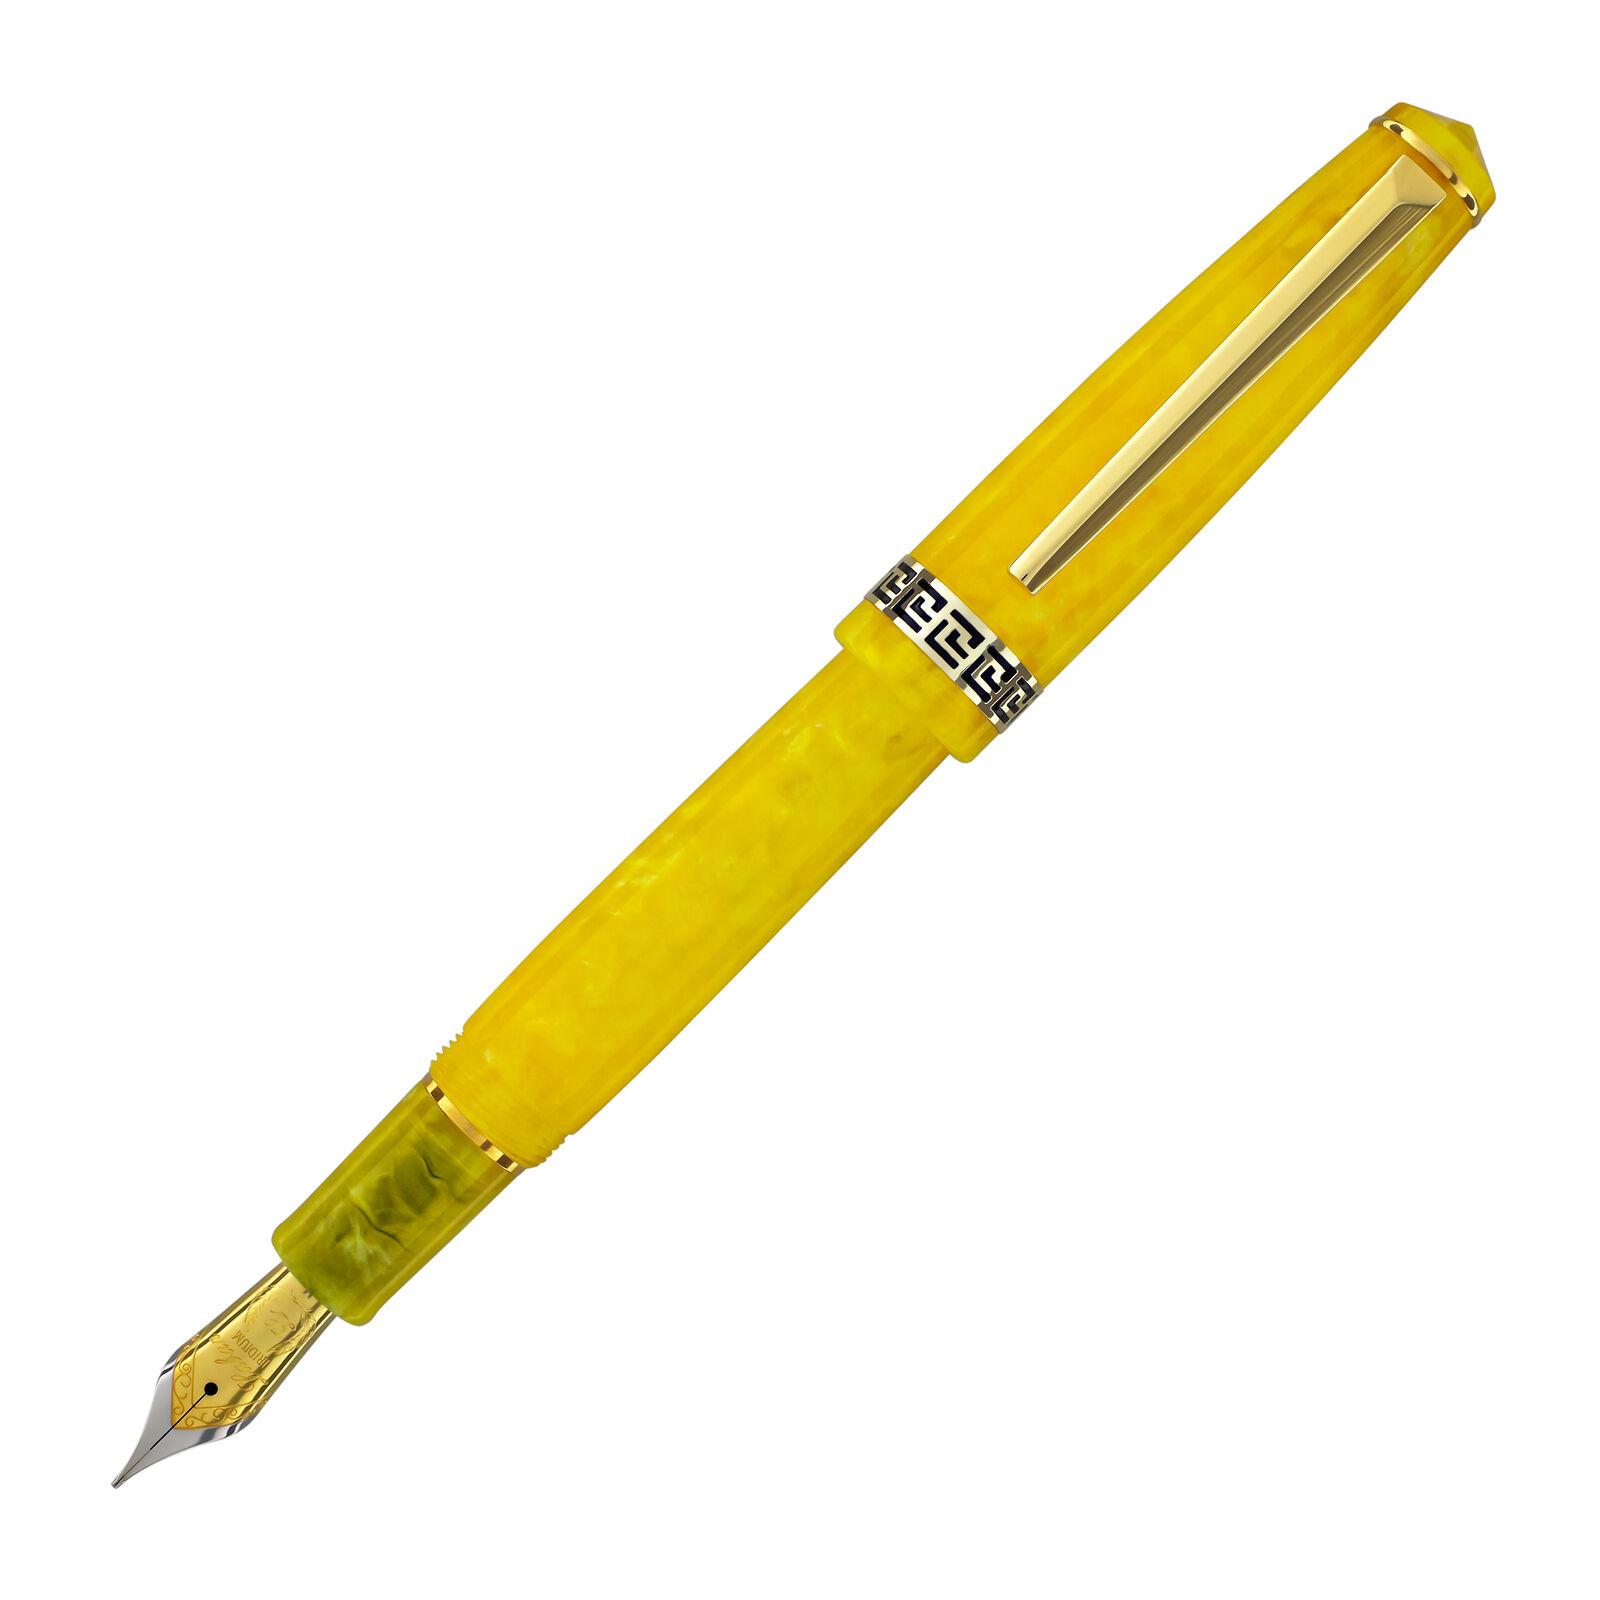 Laban Rosa Fountain Pen in Sunny Yellow - Extra Fine Point - NEW in Box